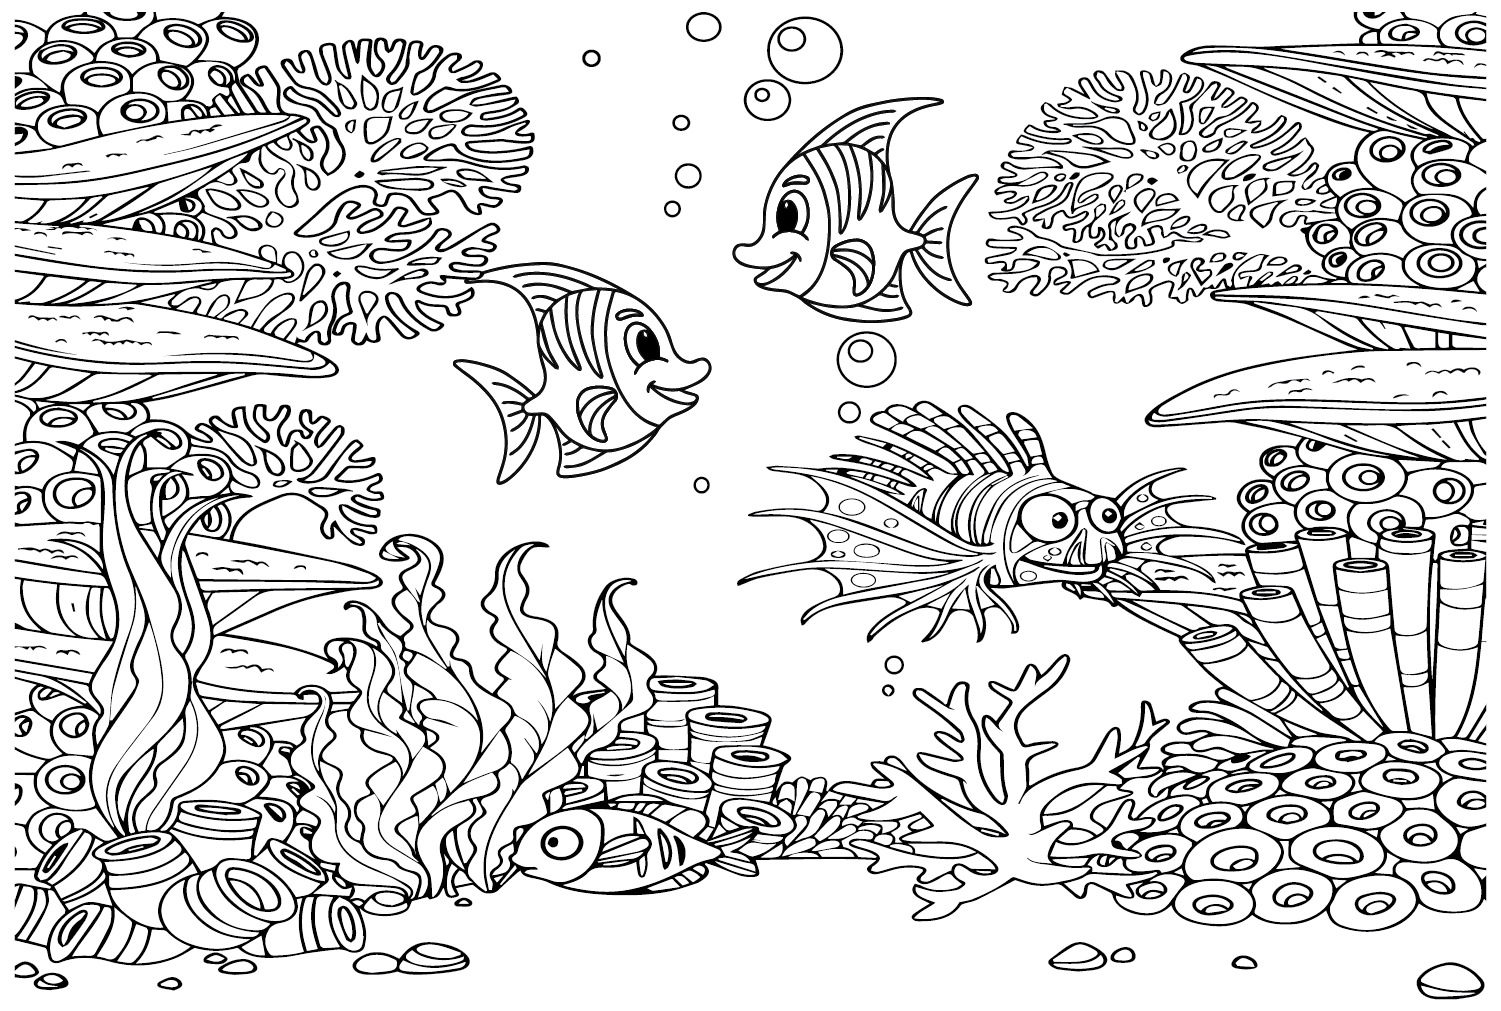 Pennant Coralfish in Water Coloring Page - Free Printable Coloring Pages